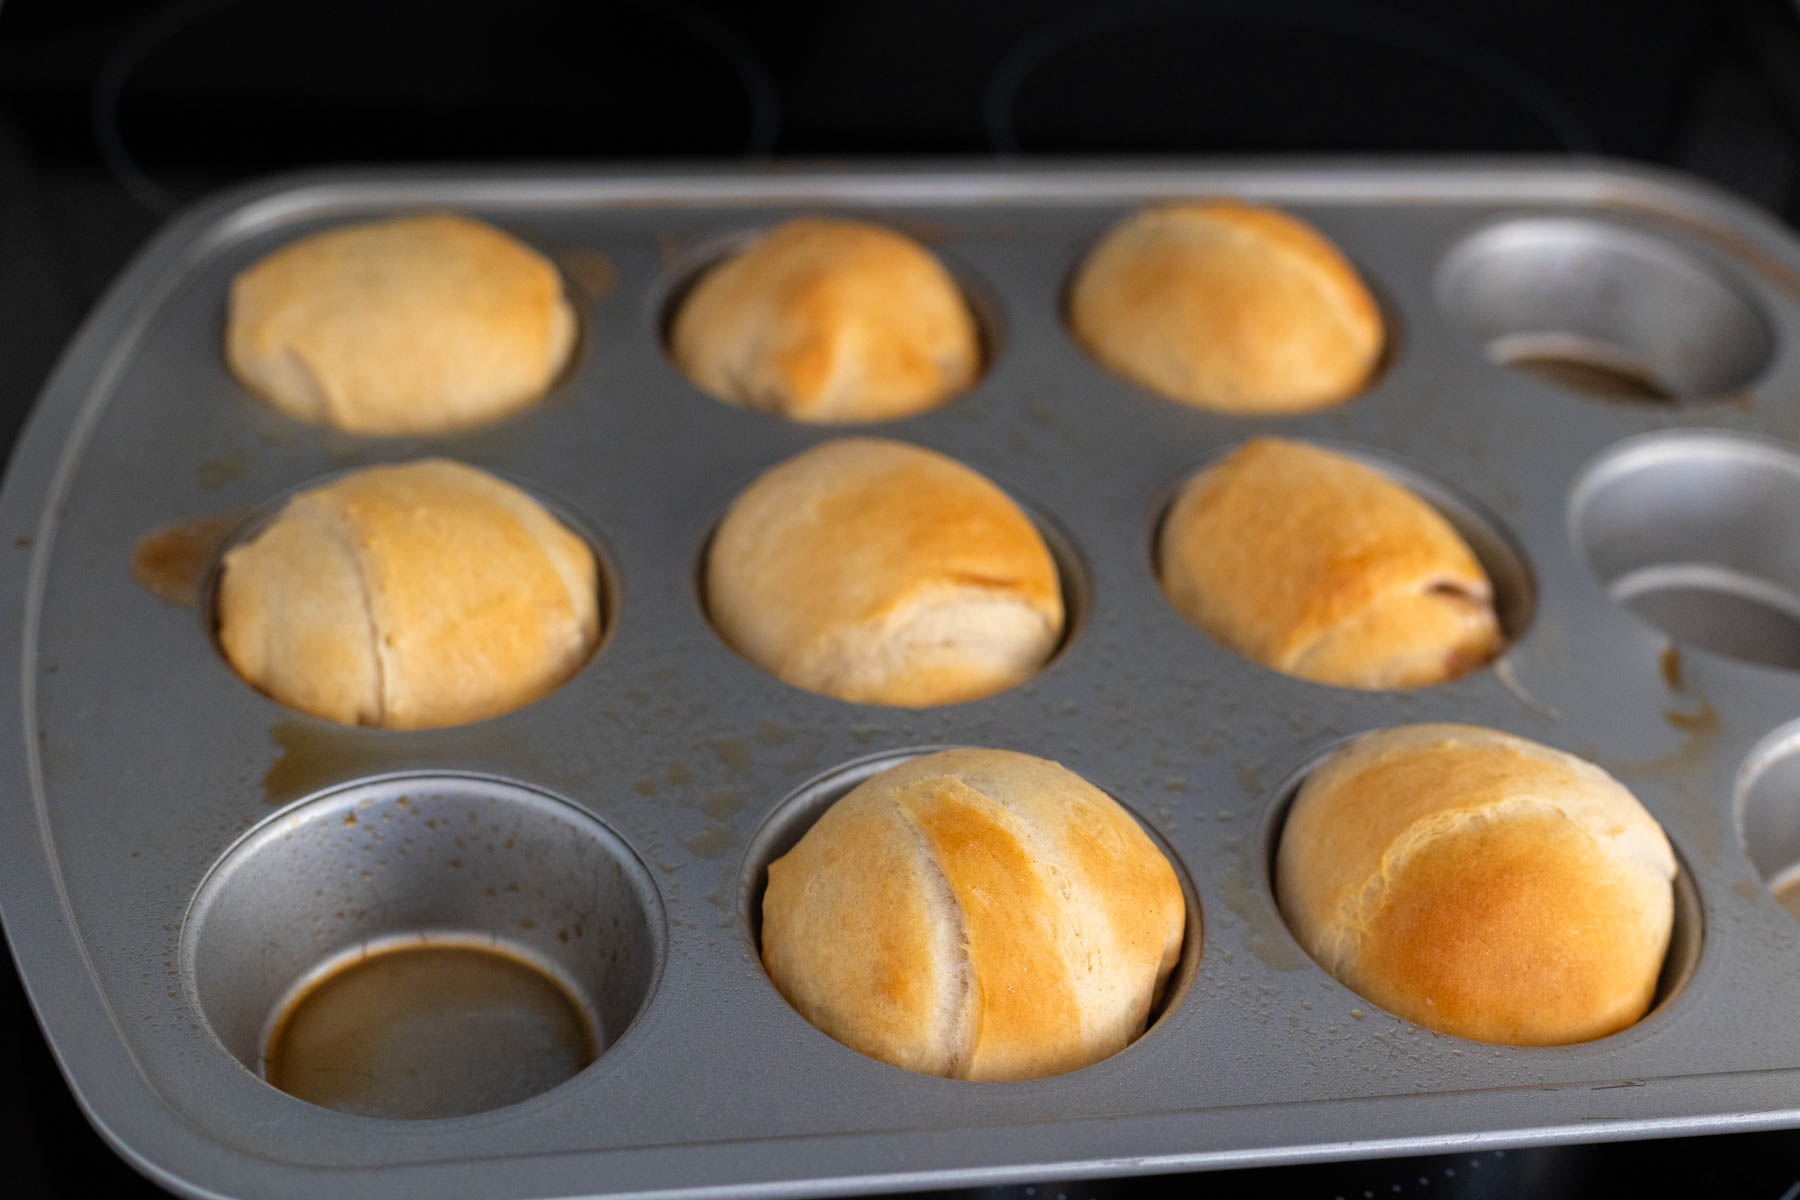 The rolls have been baked in a muffin tin and are a golden brown. 